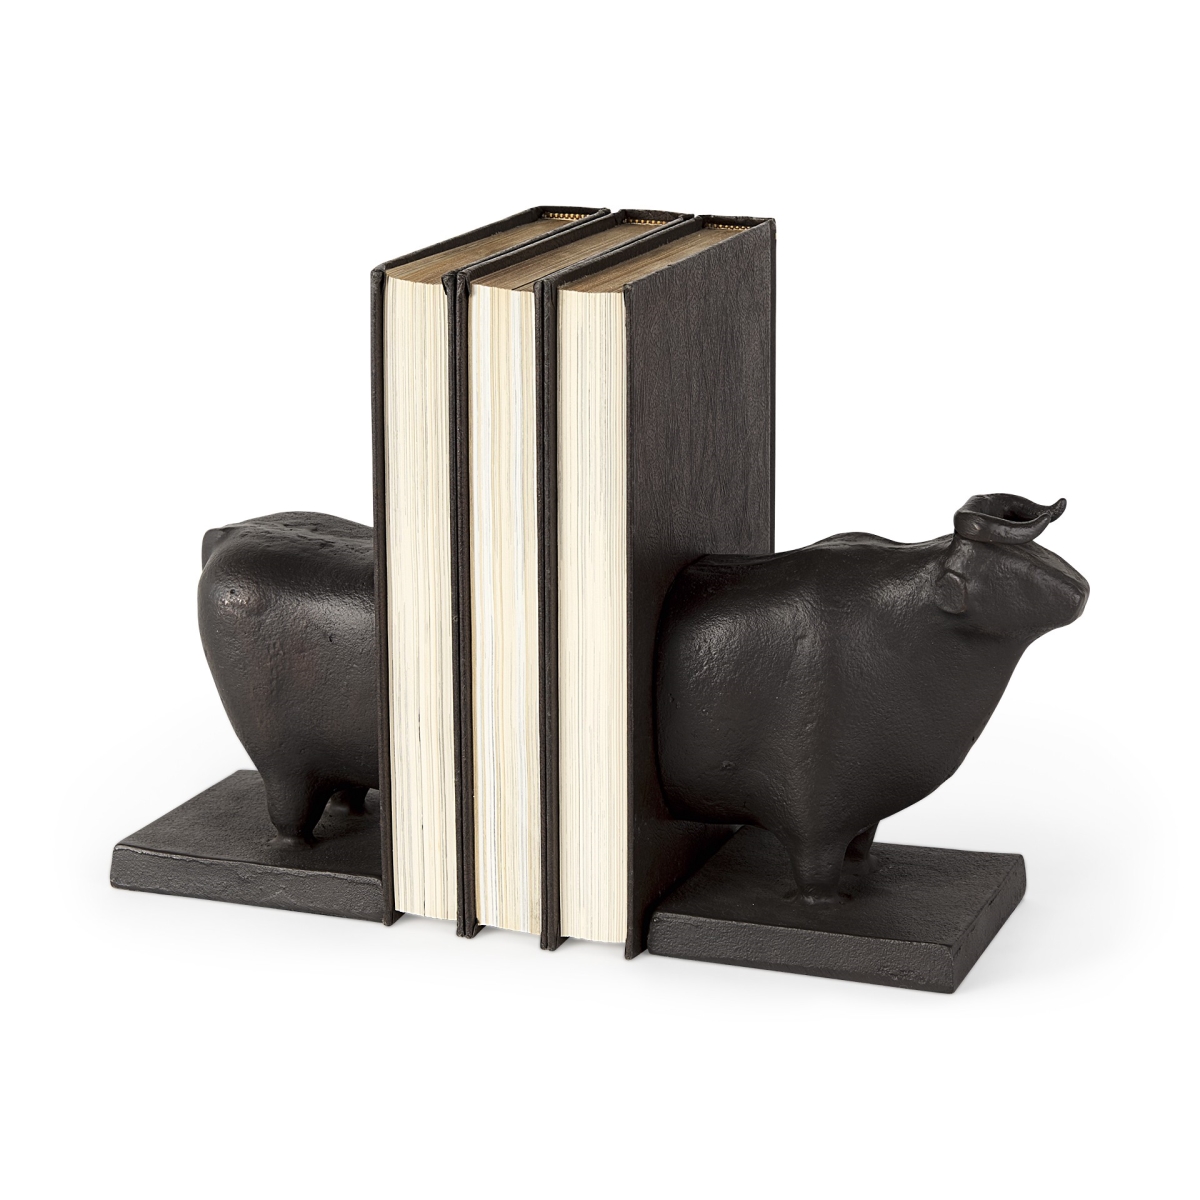 Picture of HomeRoots 392140 6.75 x 4.25 x 9 in. Black Cast Aluminum Bull Bookends